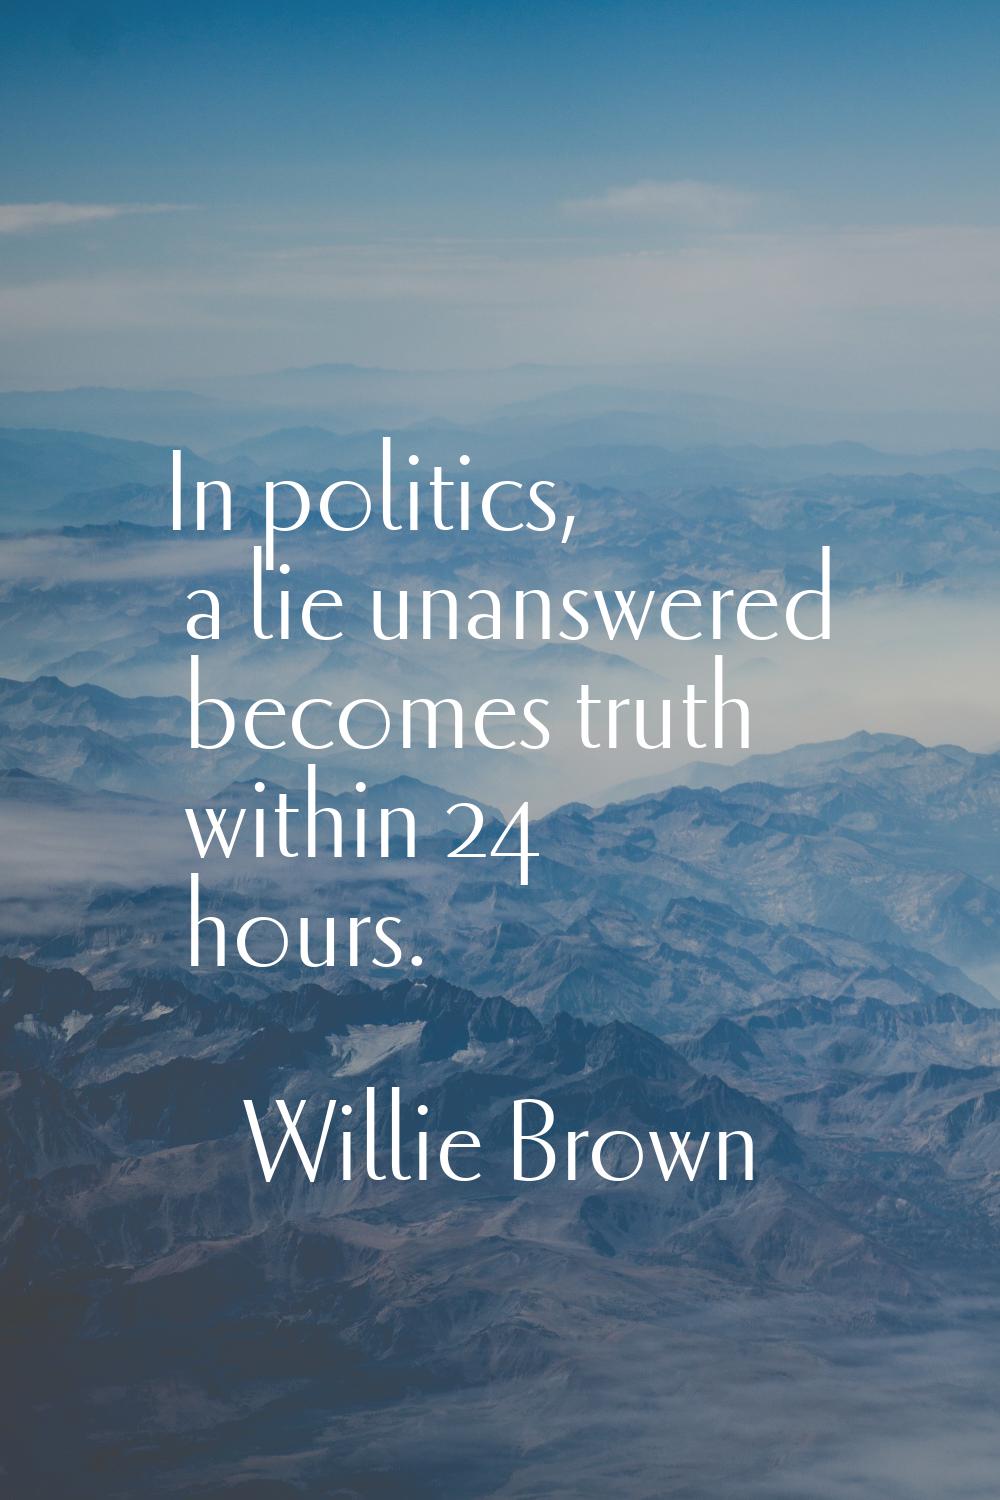 In politics, a lie unanswered becomes truth within 24 hours.